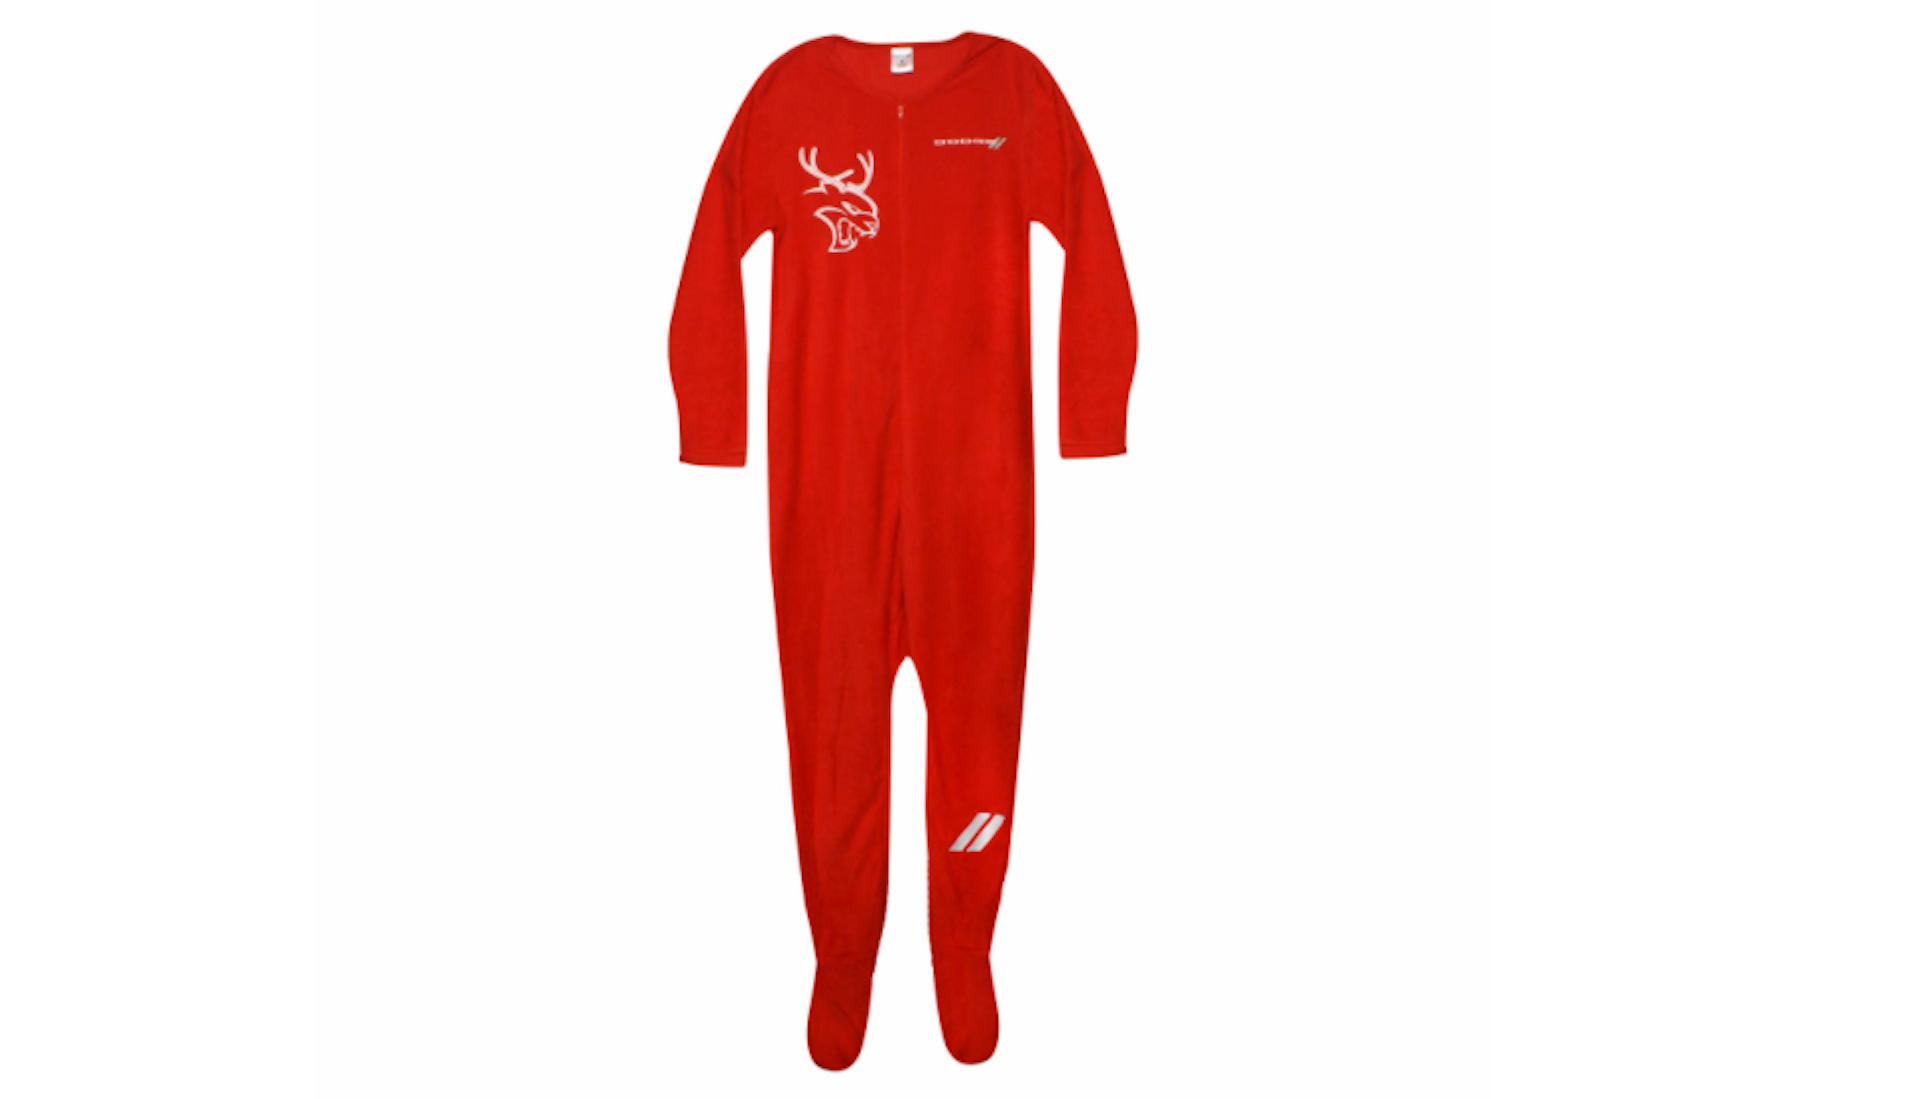 Relax With Fury in a Dodge Hellcat Reindeer Adult Onesie This Holiday Season